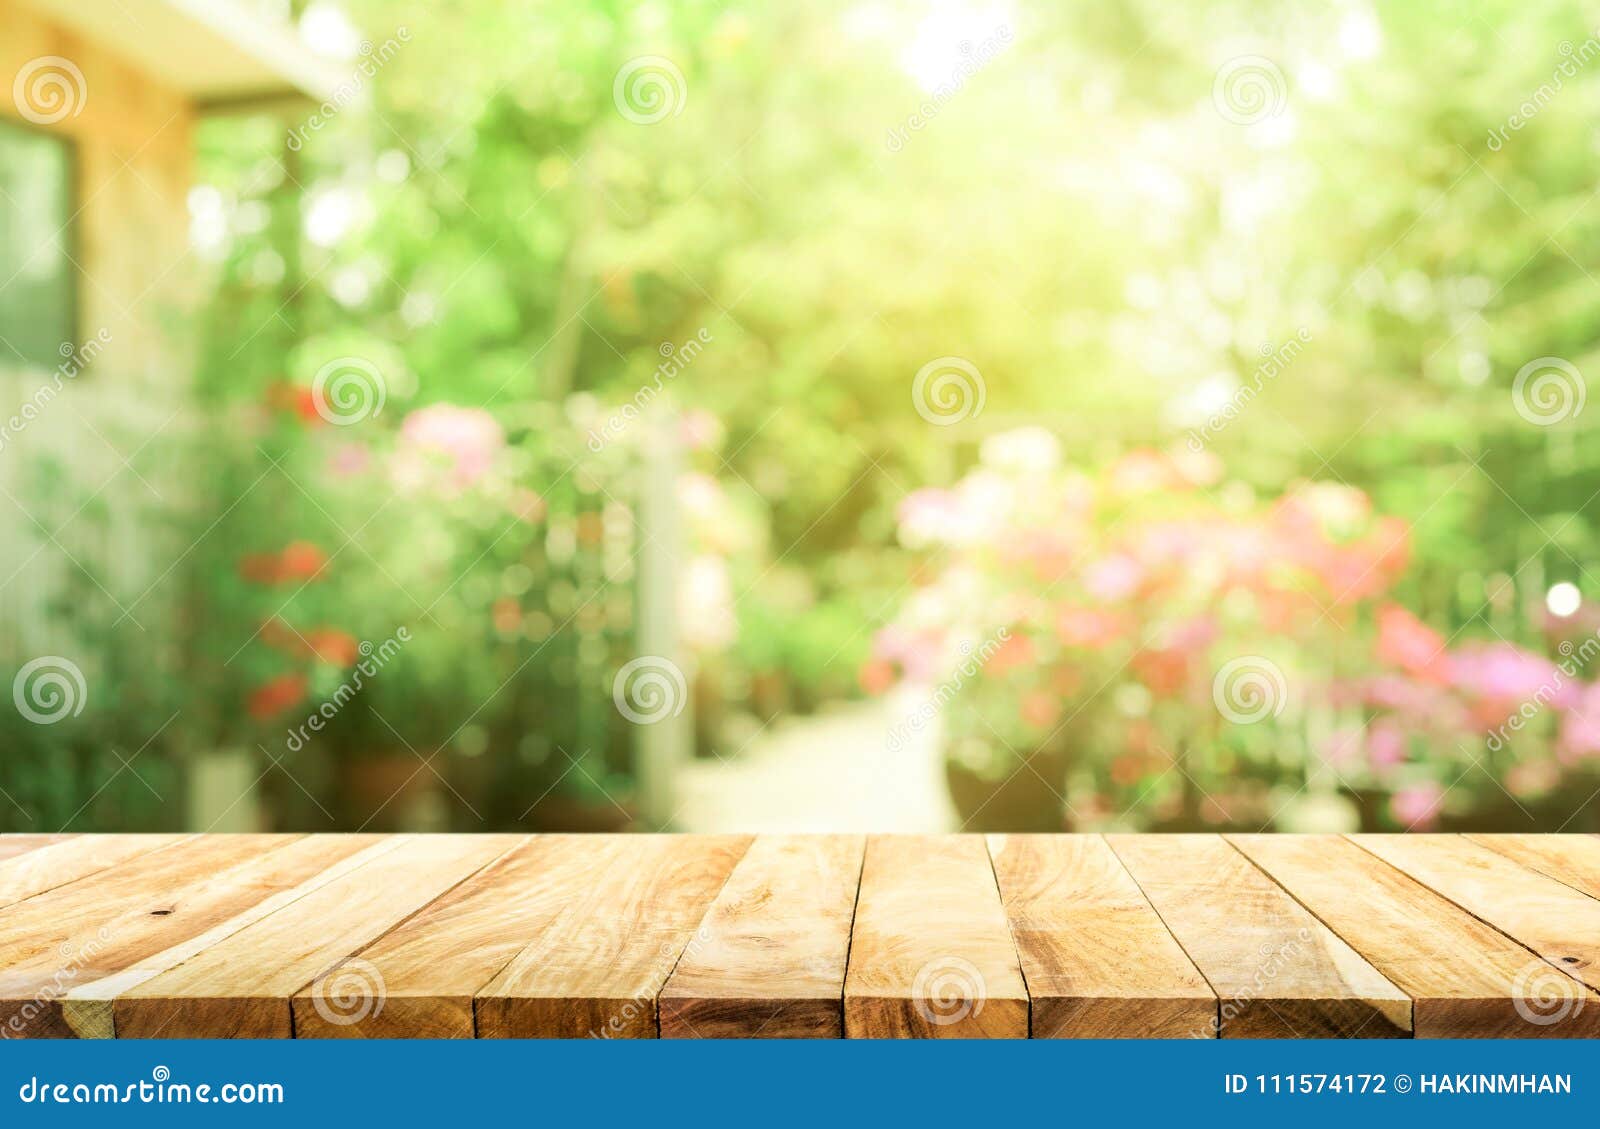 empty wood table top on blur abstract green from garden